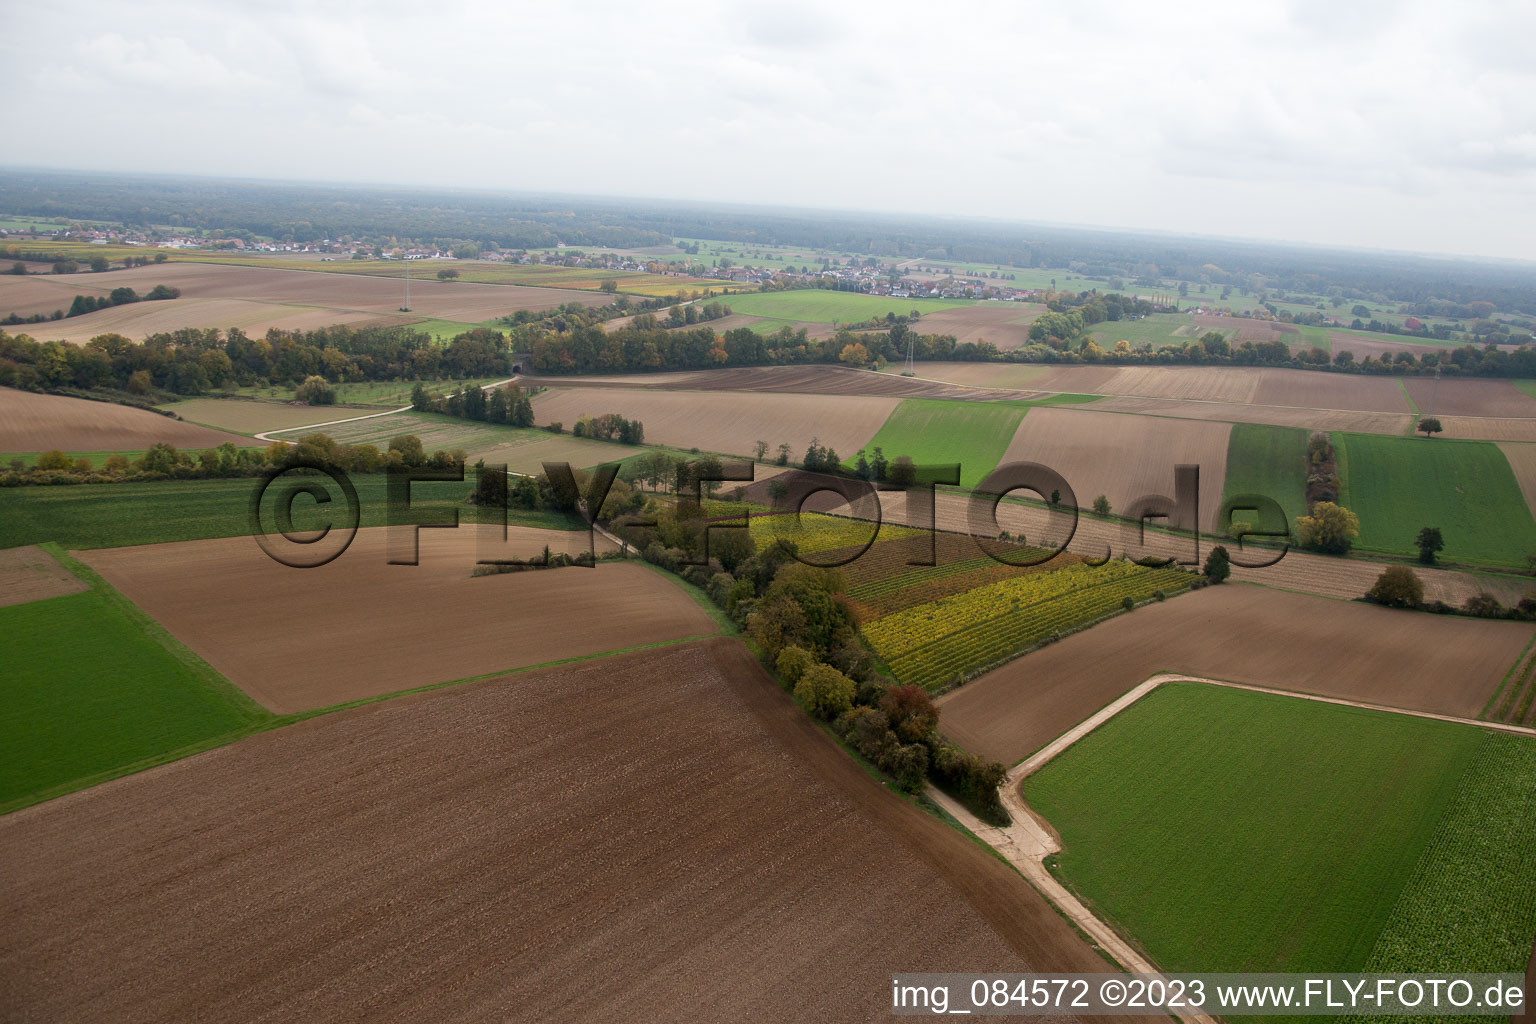 Winden in the state Rhineland-Palatinate, Germany viewn from the air